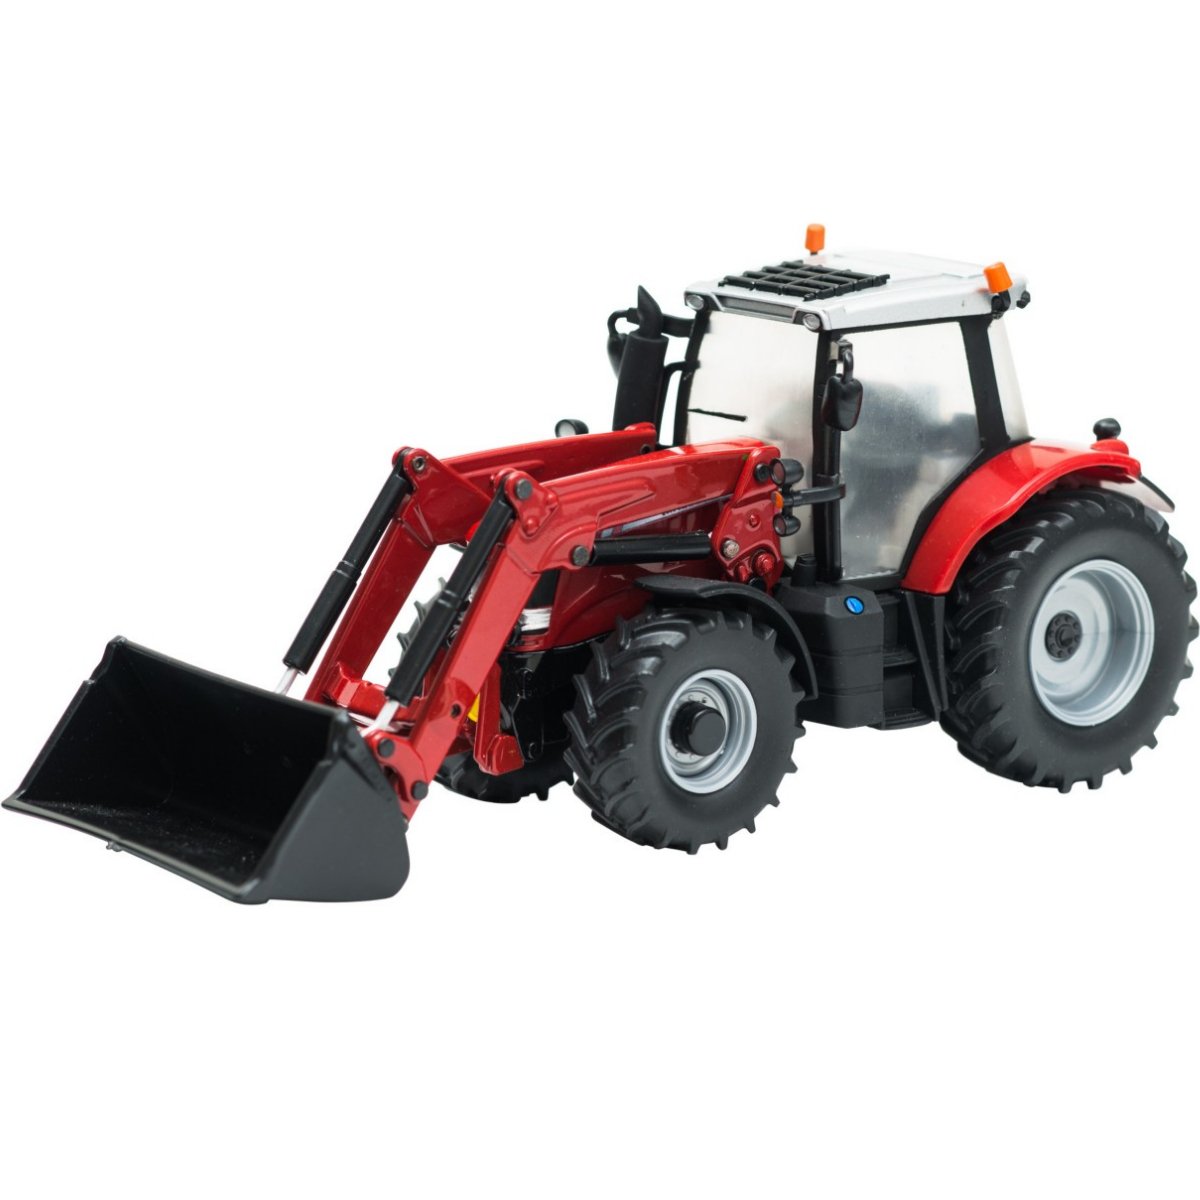 Britains Massey Ferguson 6616 Tractor with Loader - 1:32 Scale - Phillips Hobbies